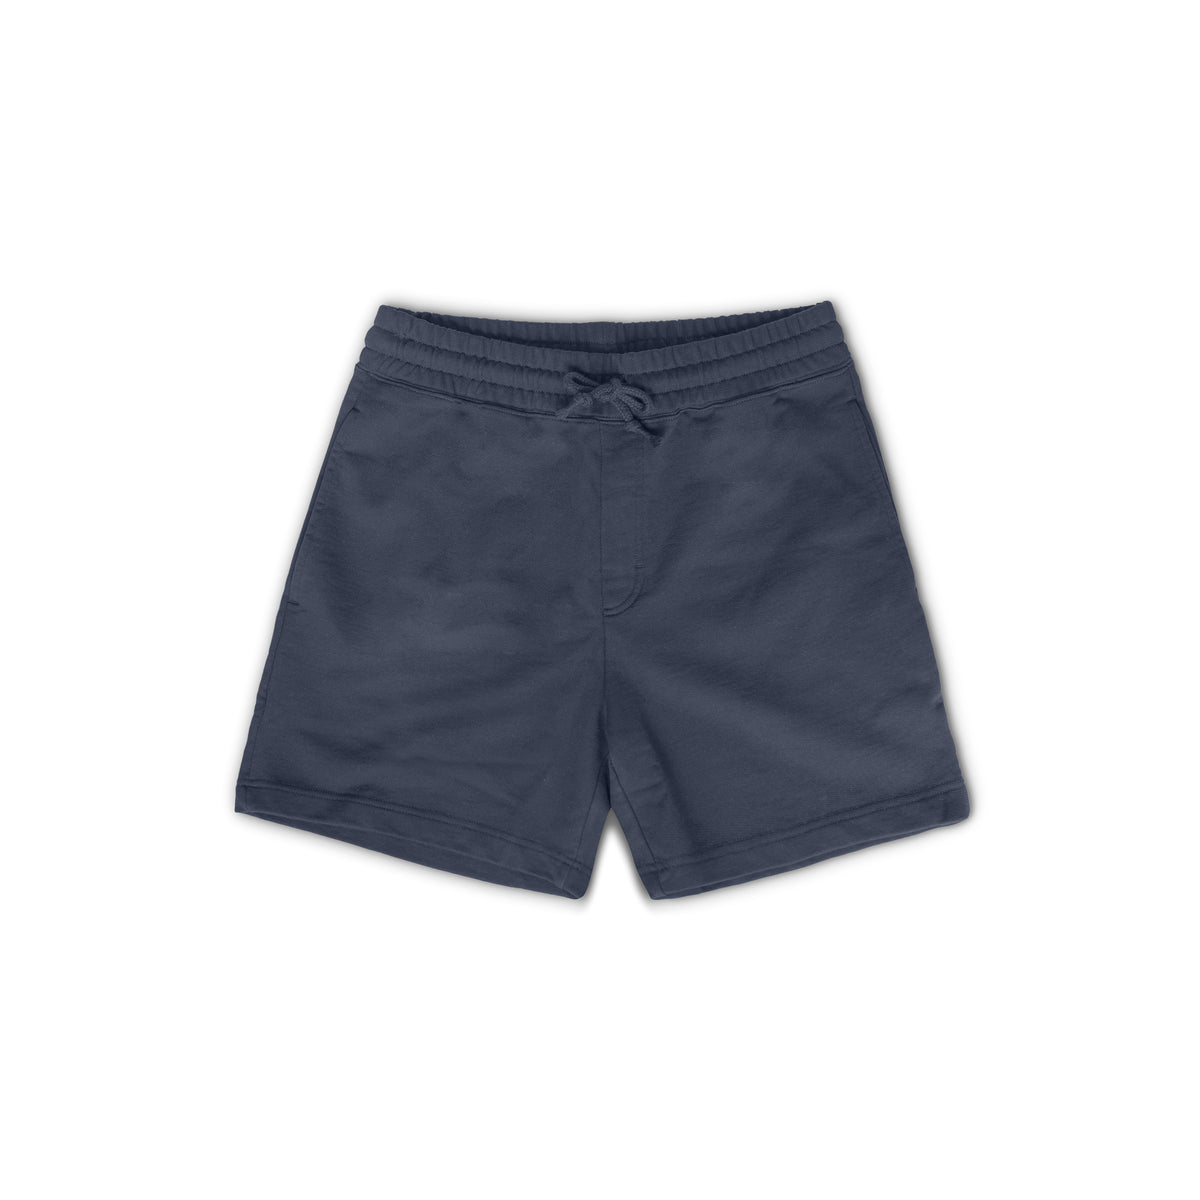 Sweatpant Short Navy made from Organic Cotton - Unrecorded - Front Women - Front Men